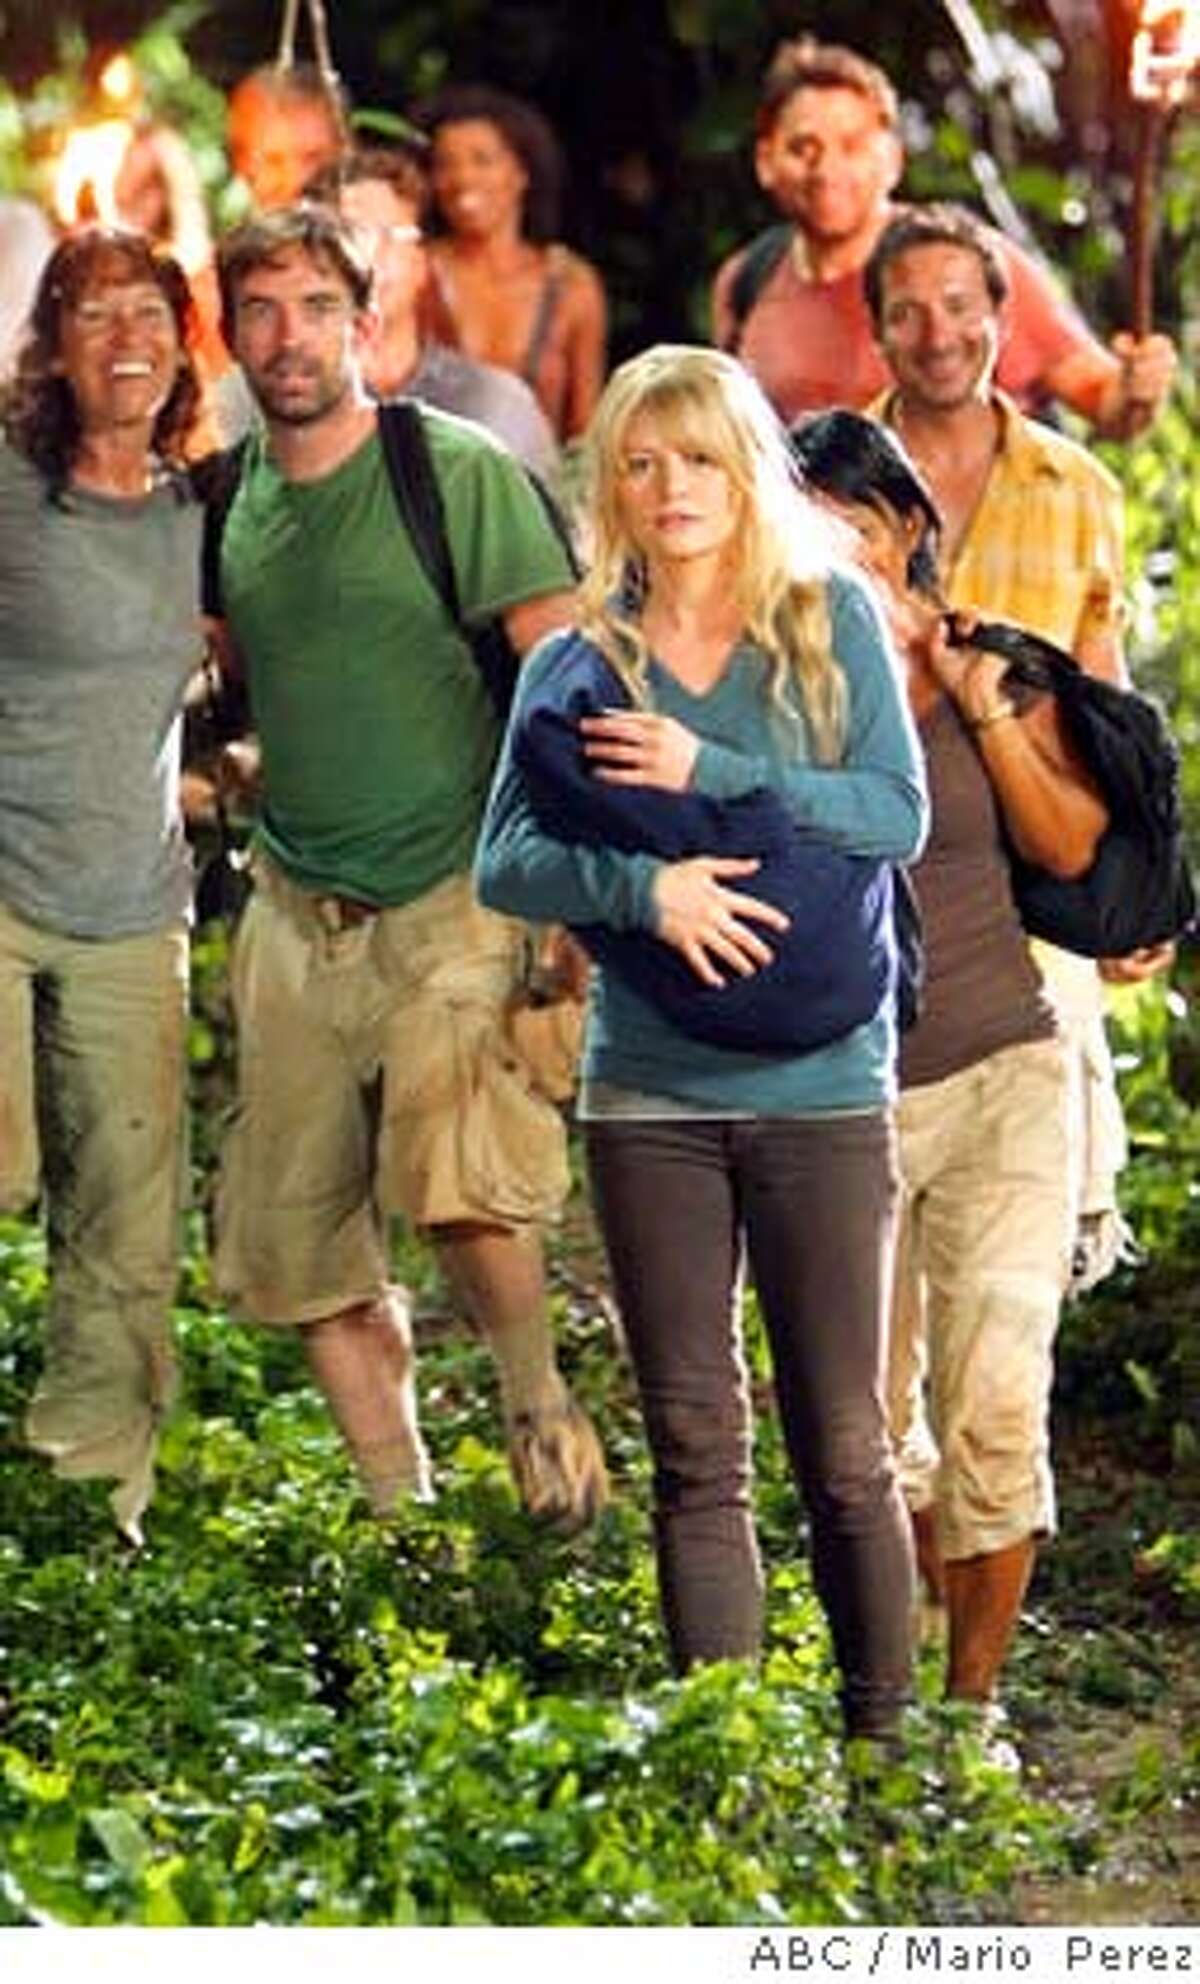 **REPLACES PREVIOUS NYET370 HIGHER RES IMAGE** In this photo released by ABC shows a scene from the season premiere episode, of "Lost" title "The Beginning of the End," feeling that their rescue is close at hand, the survivors don't know whether to believe Charlie's final message that the people claiming to liberate them are not who they seem to be. (AP Photo/Mario Perez,ABC) Ran on: 01-30-2008 Season 4 of ABCs Lost will not disappoint avid fans, but ABC is trying to bring in new viewers by offering catch-up screenings of the Season 3 finale and a recap show of Lost stories and characters from the past three seasons. Season 4 is shaping up to be as fast-paced as the second half of Season 3.